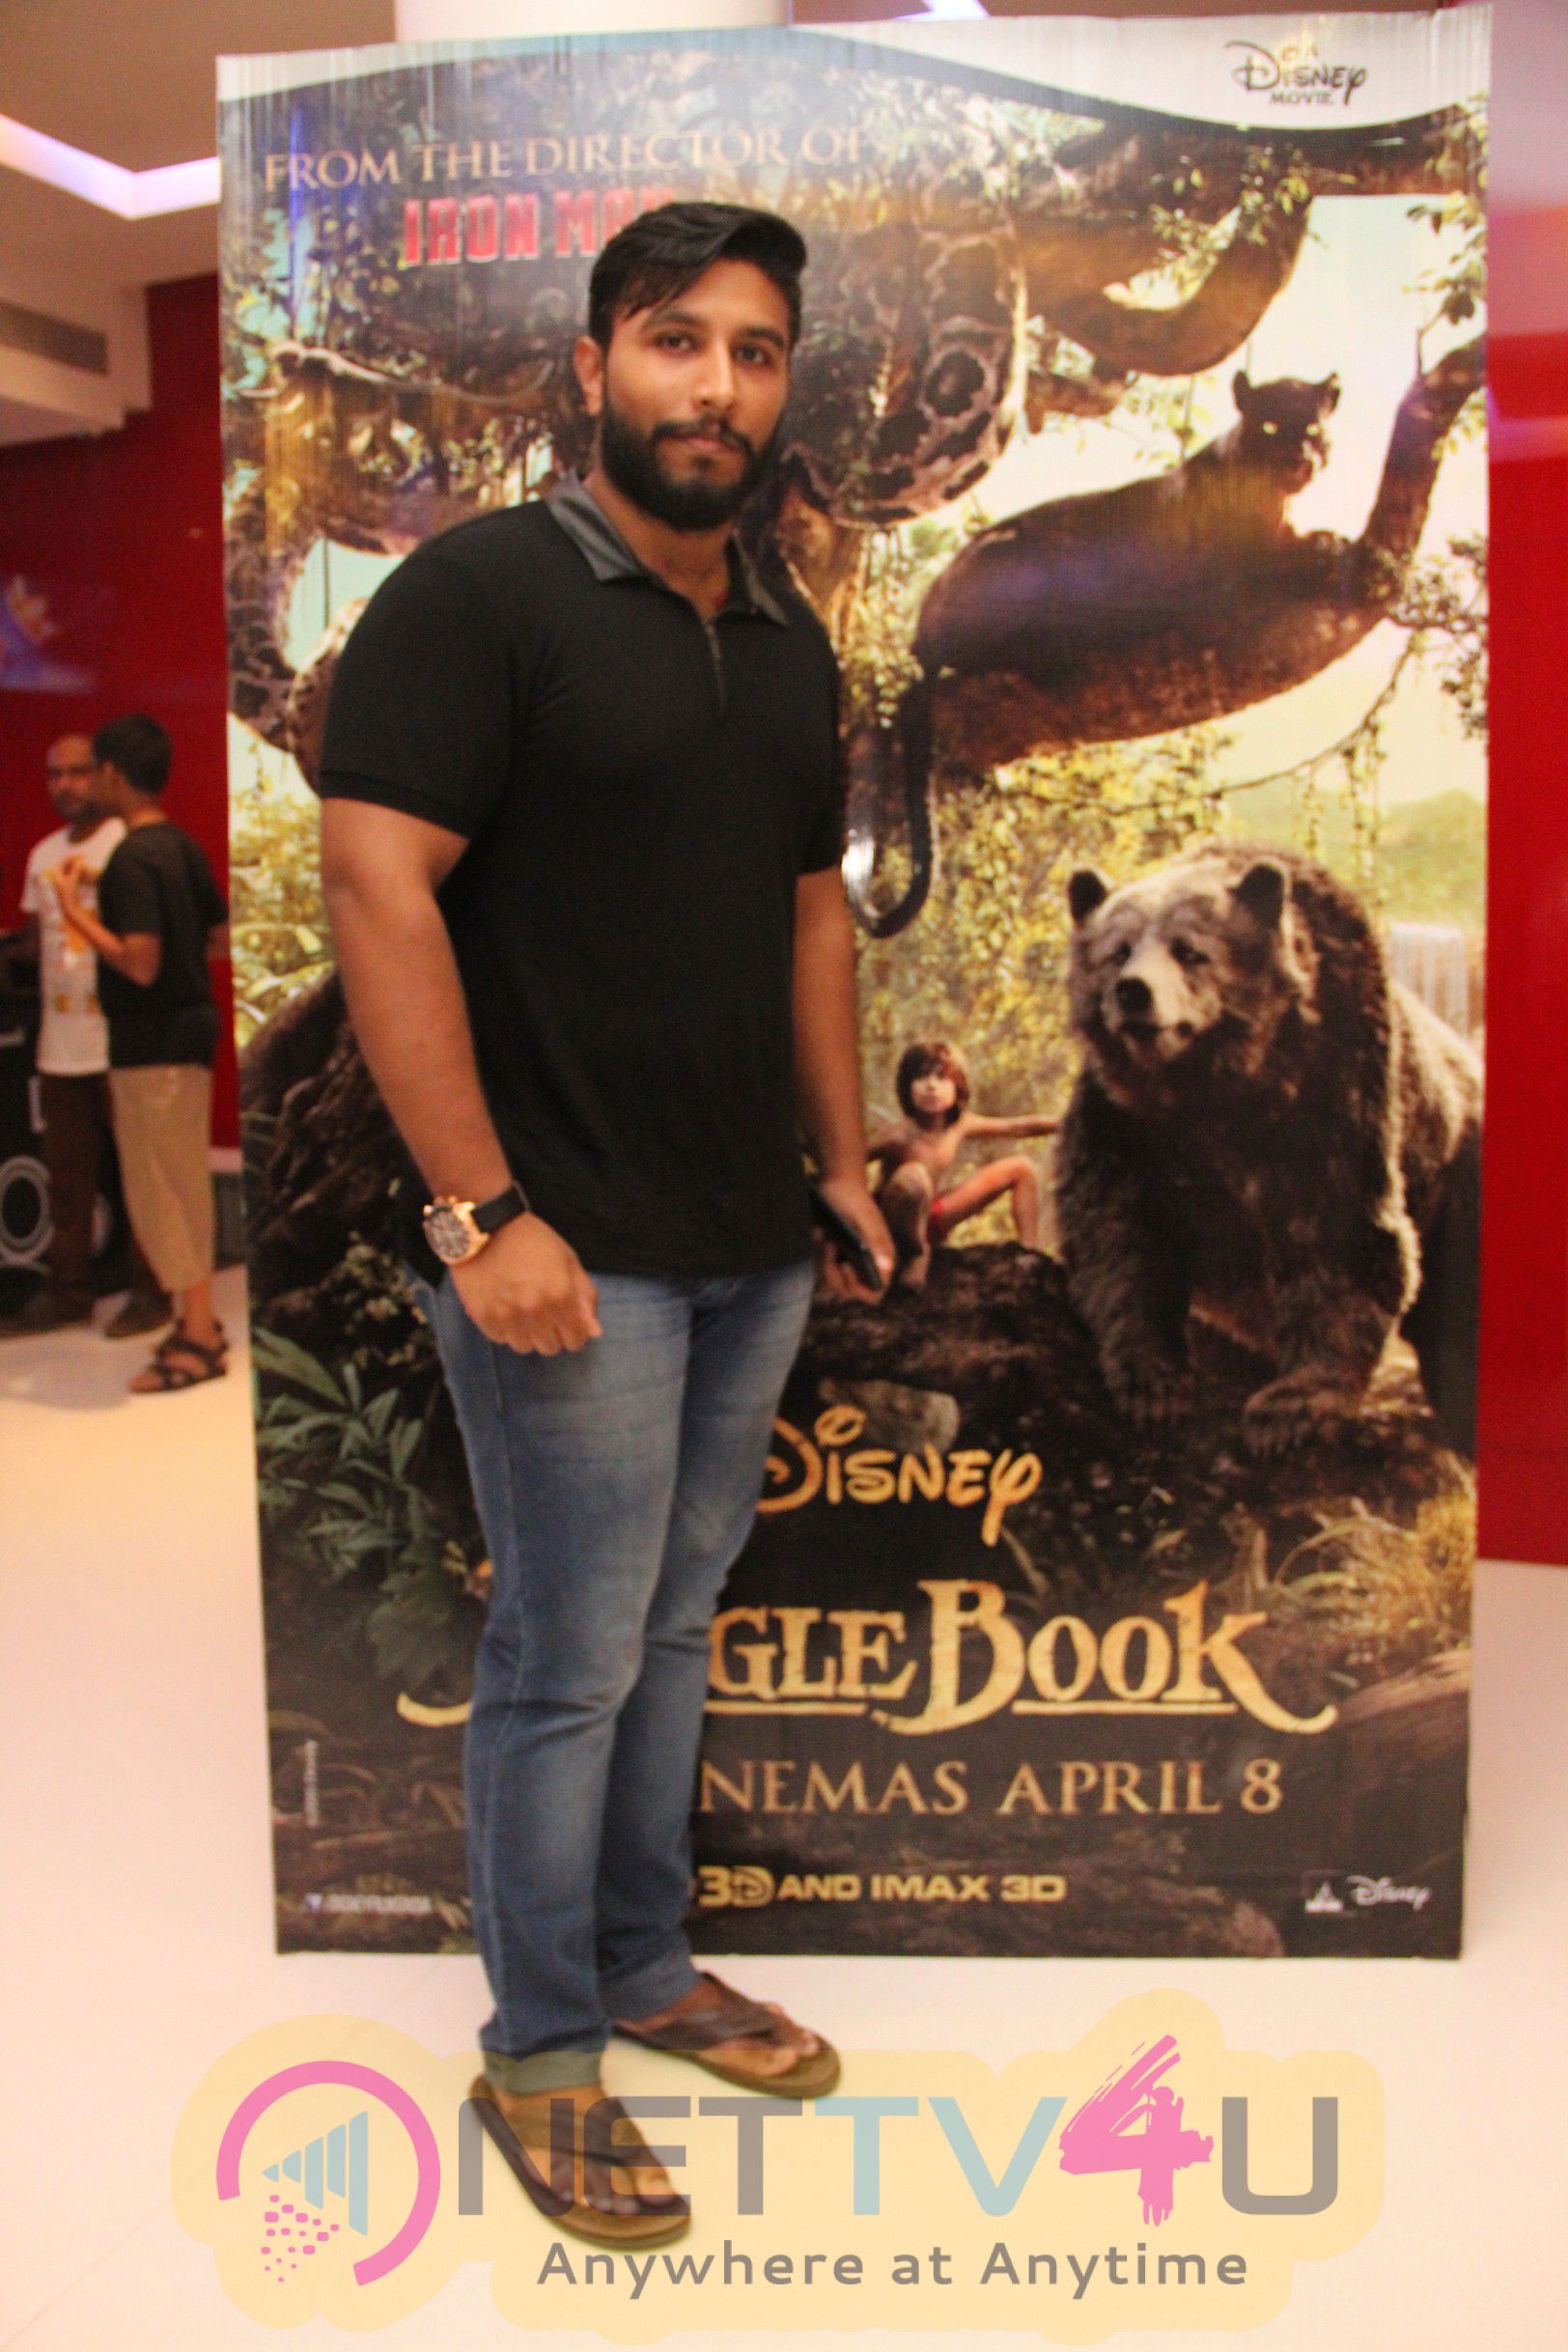  Celebrity Premiere Of  Jungle Book Exclusive Photos English Gallery